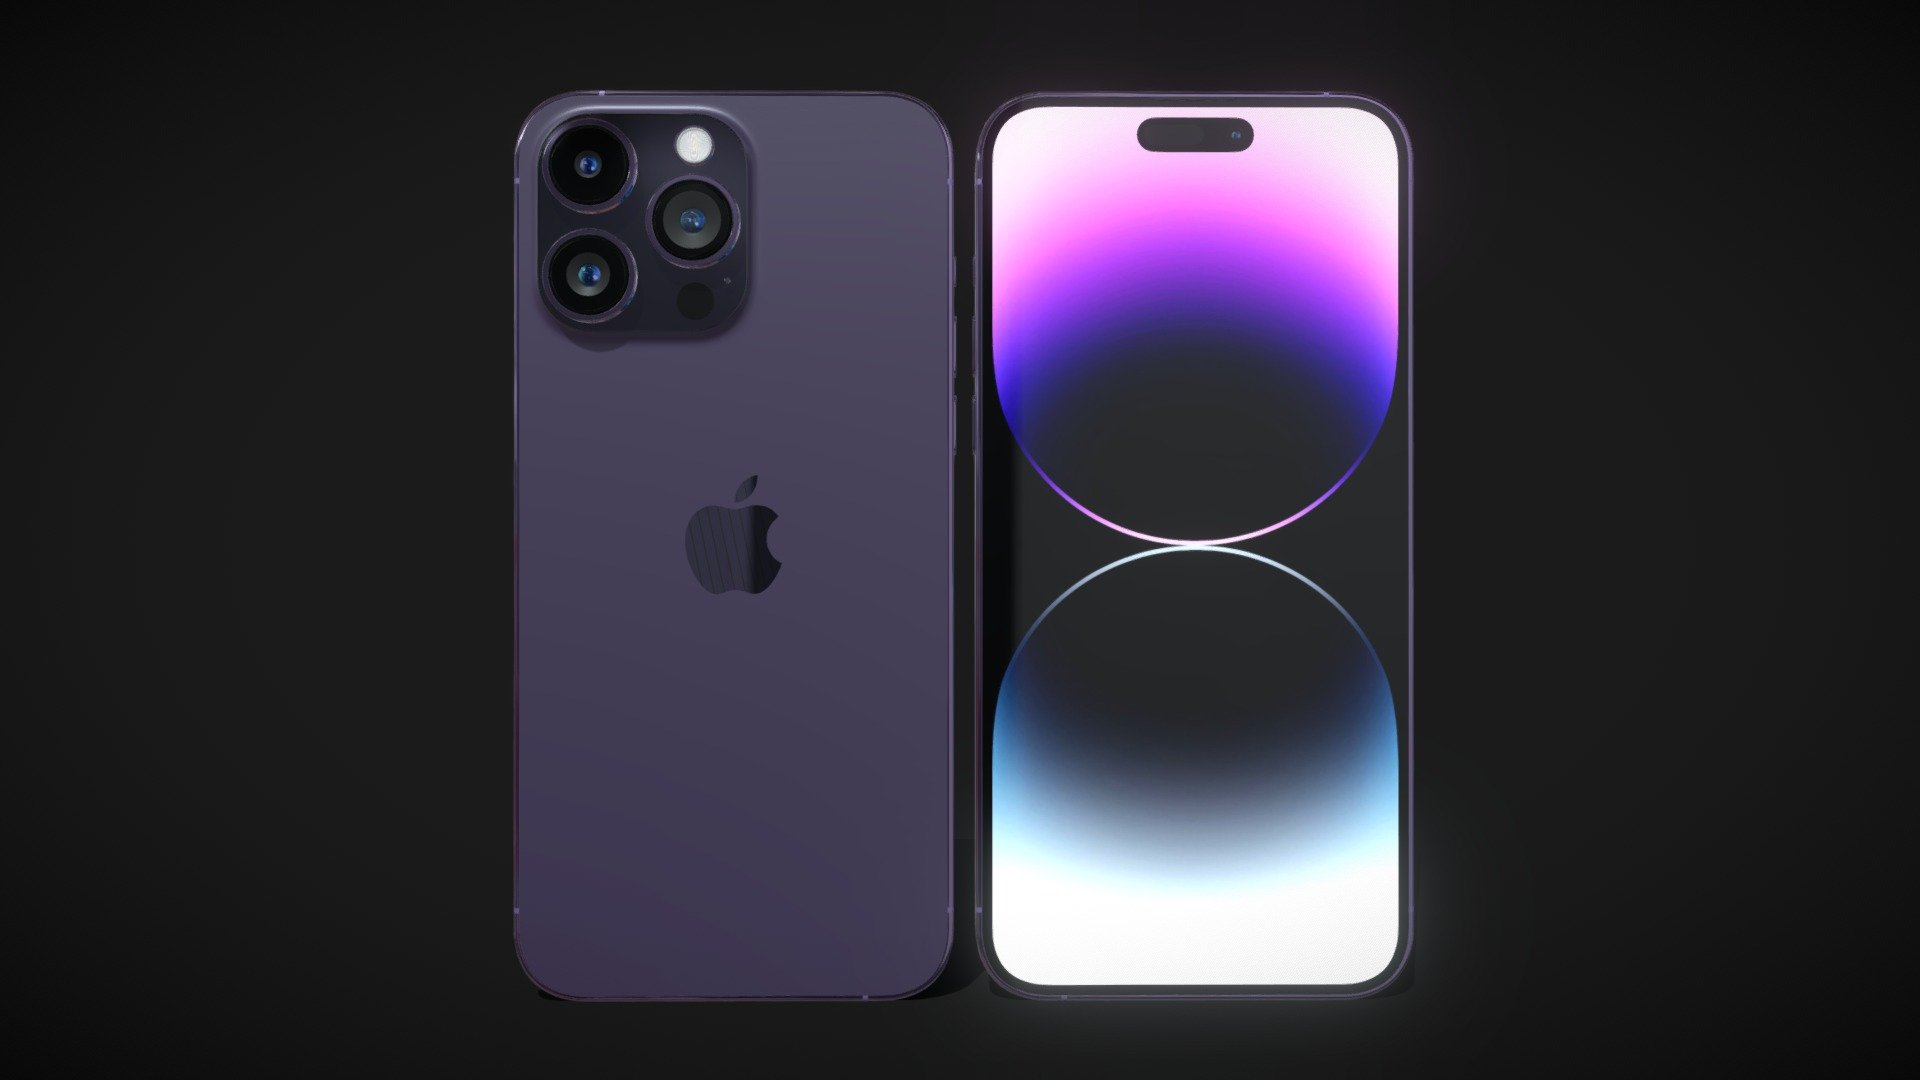 Realistic (copy) 3d model Apple iPhone 14 Pro MAX Deep Purple.

This set:




1 file obj standard

1 file 3ds Max 2013 vray material

1 file 3ds Max 2013 corona material

1 file of 3Ds

1 file e3d full set of materials.

1 file cinema 4d standard.

1 file blender cycles.

Topology of geometry:
- forms and proportions of The 3D model
- the geometry of the model was created very neatly
- there are no many-sided polygons
- detailed enough for close-up renders
- the model optimized for turbosmooth modifier
- Not collapsed the turbosmooth modified
- apply the Smooth modifier with a parameter to get the desired level of detail

Organization of scene:
- to all objects and materials
- real world size (system units - mm)
- coordinates of location of the model in space (x0, y0, z0)
- does not contain extraneous or hidden objects (lights, cameras, shapes etc.) - Apple iPhone 14 Pro MAX Deep Purple - Buy Royalty Free 3D model by madMIX 3d model